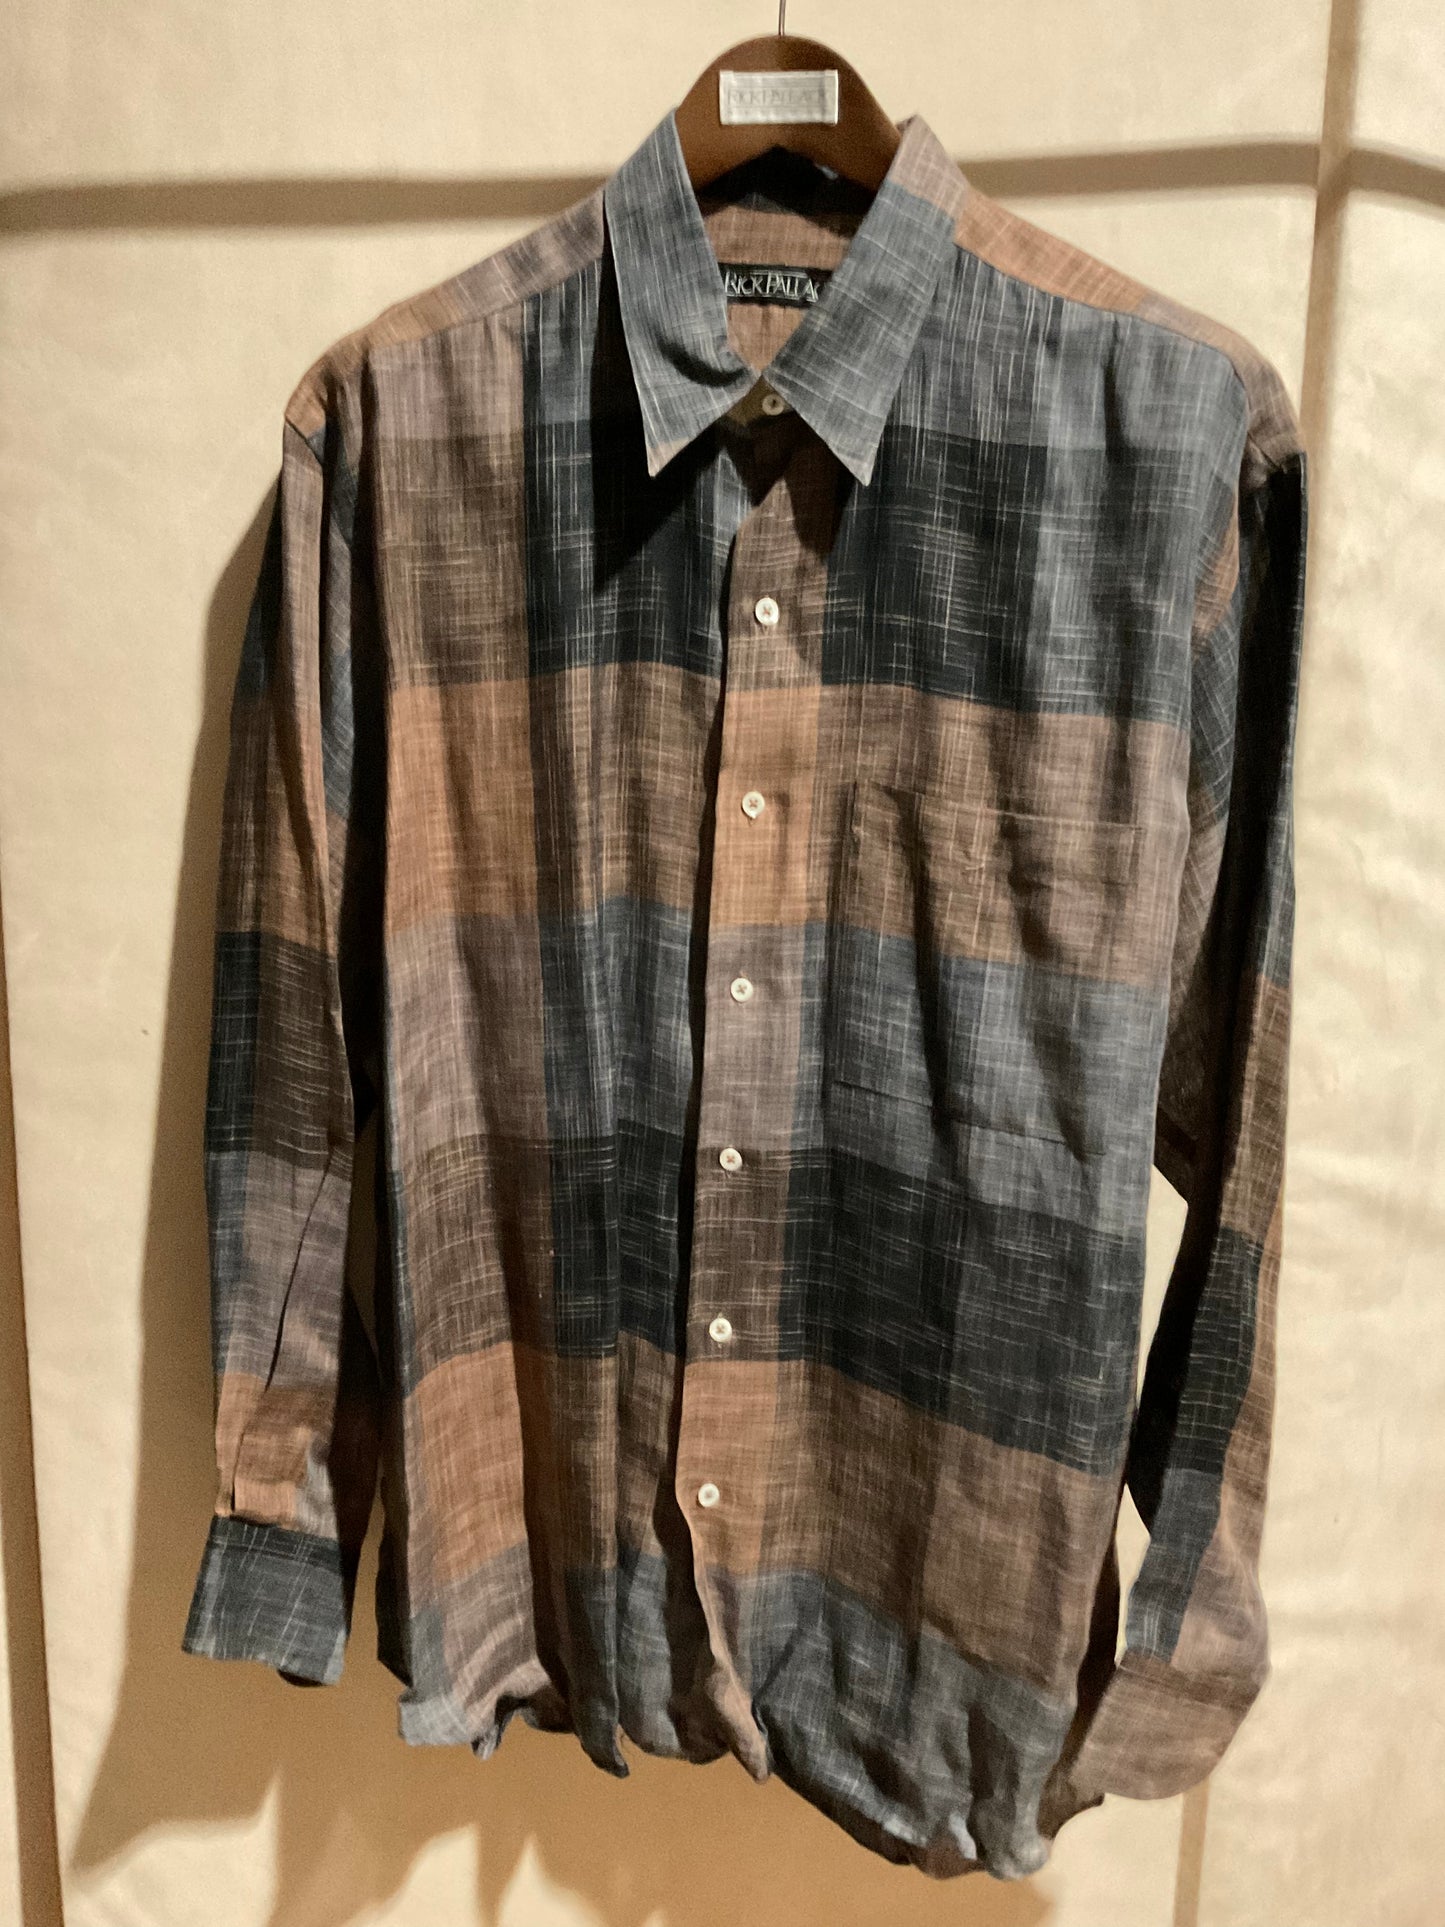 R P SPORT SHIRT / PURE LINEN / NEW / LARGE - EXTRA LARGE / MADE IN USA